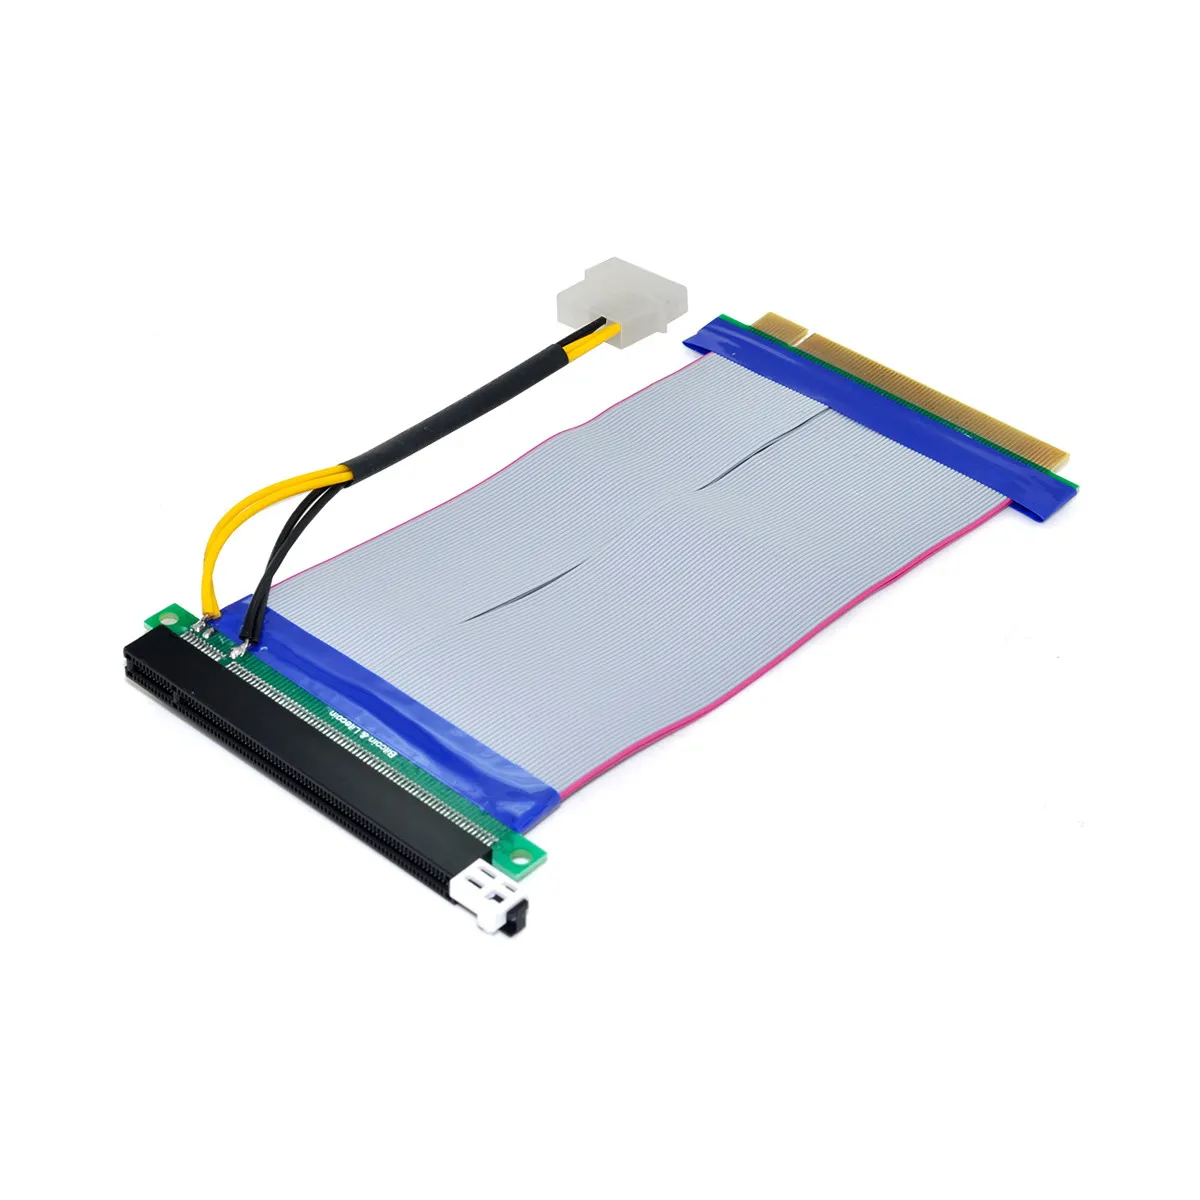 

Jimier Chenyang PCI-E Express 16X to 16x Riser Extender Card with Molex IDE Power & Ribbon Cable 20cm